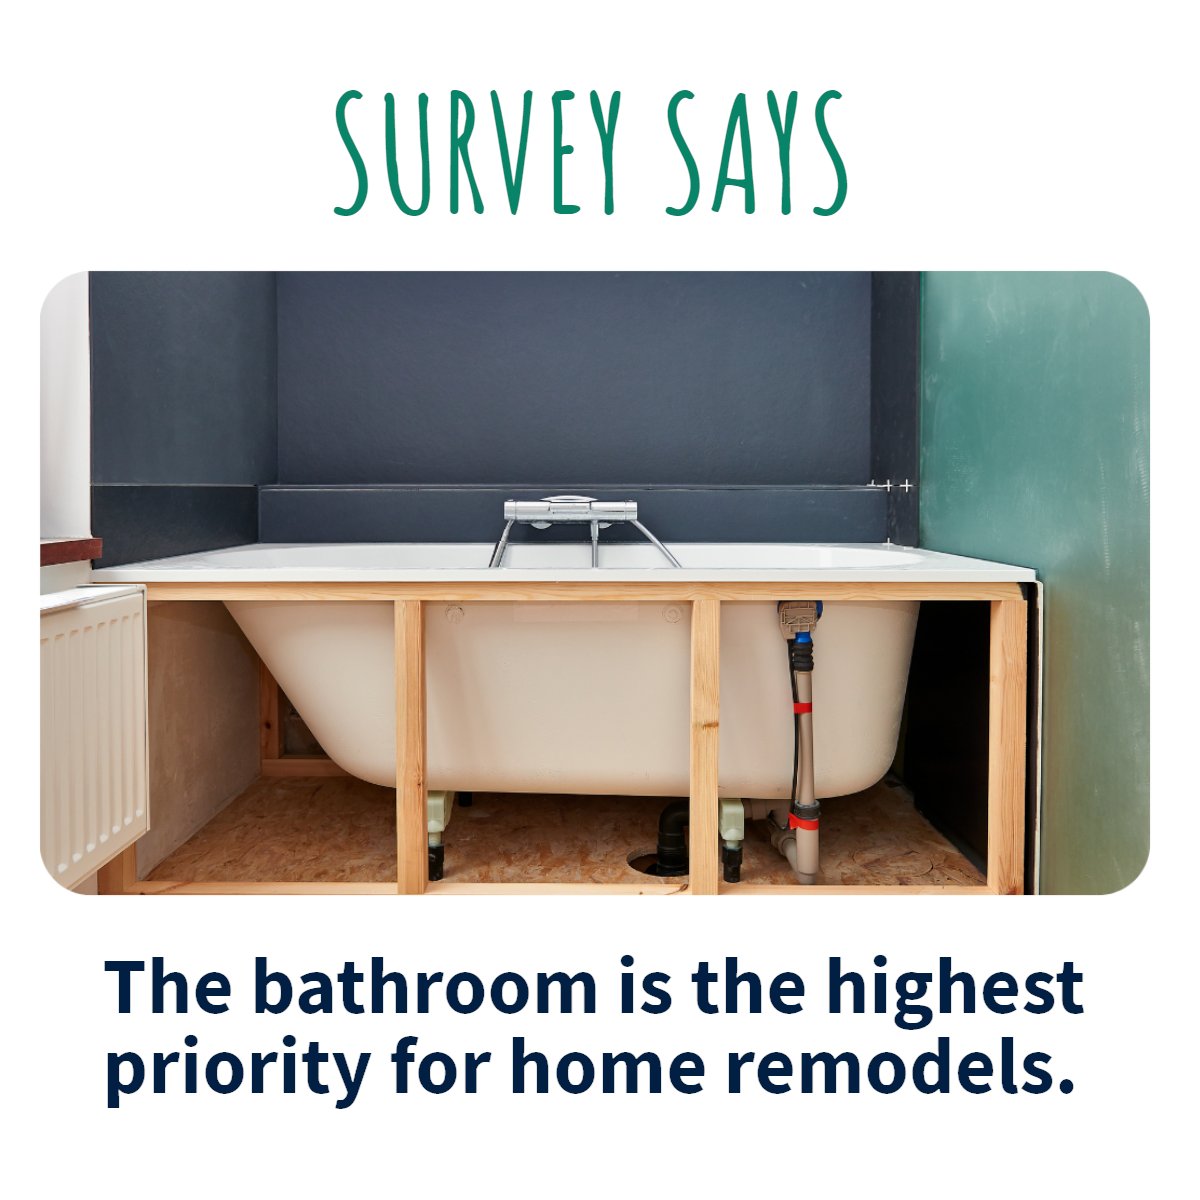 Done well, a bathroom remodel fulfills two important goals: 1. Your new bathroom is much more functional and simplifies your morning routine. 2. It looks amazing. 🛀

#remodel #diy #remodeling #diyhomedecor #bathremodel #bathroom
 #karenbruckerrealestate